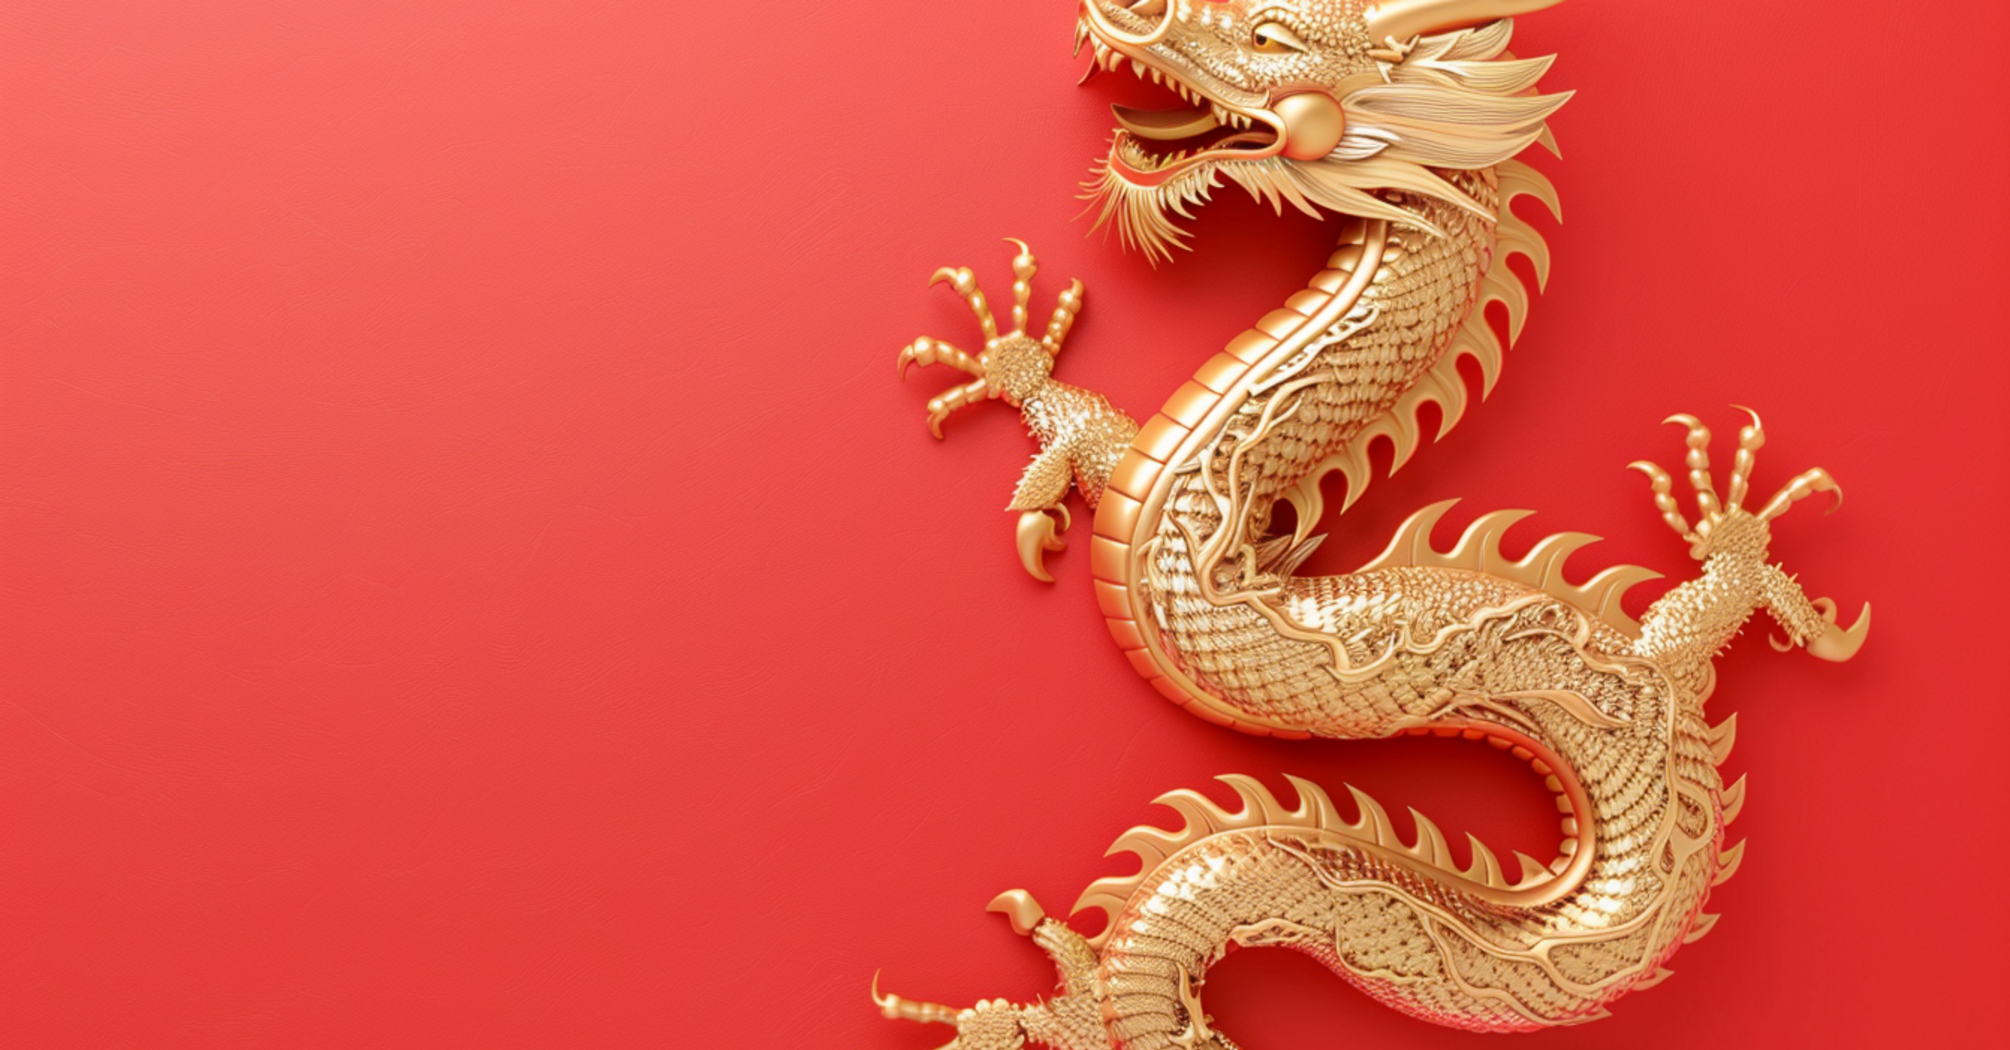 Perfect day to focus on personal growth: Chinese horoscope for June 9